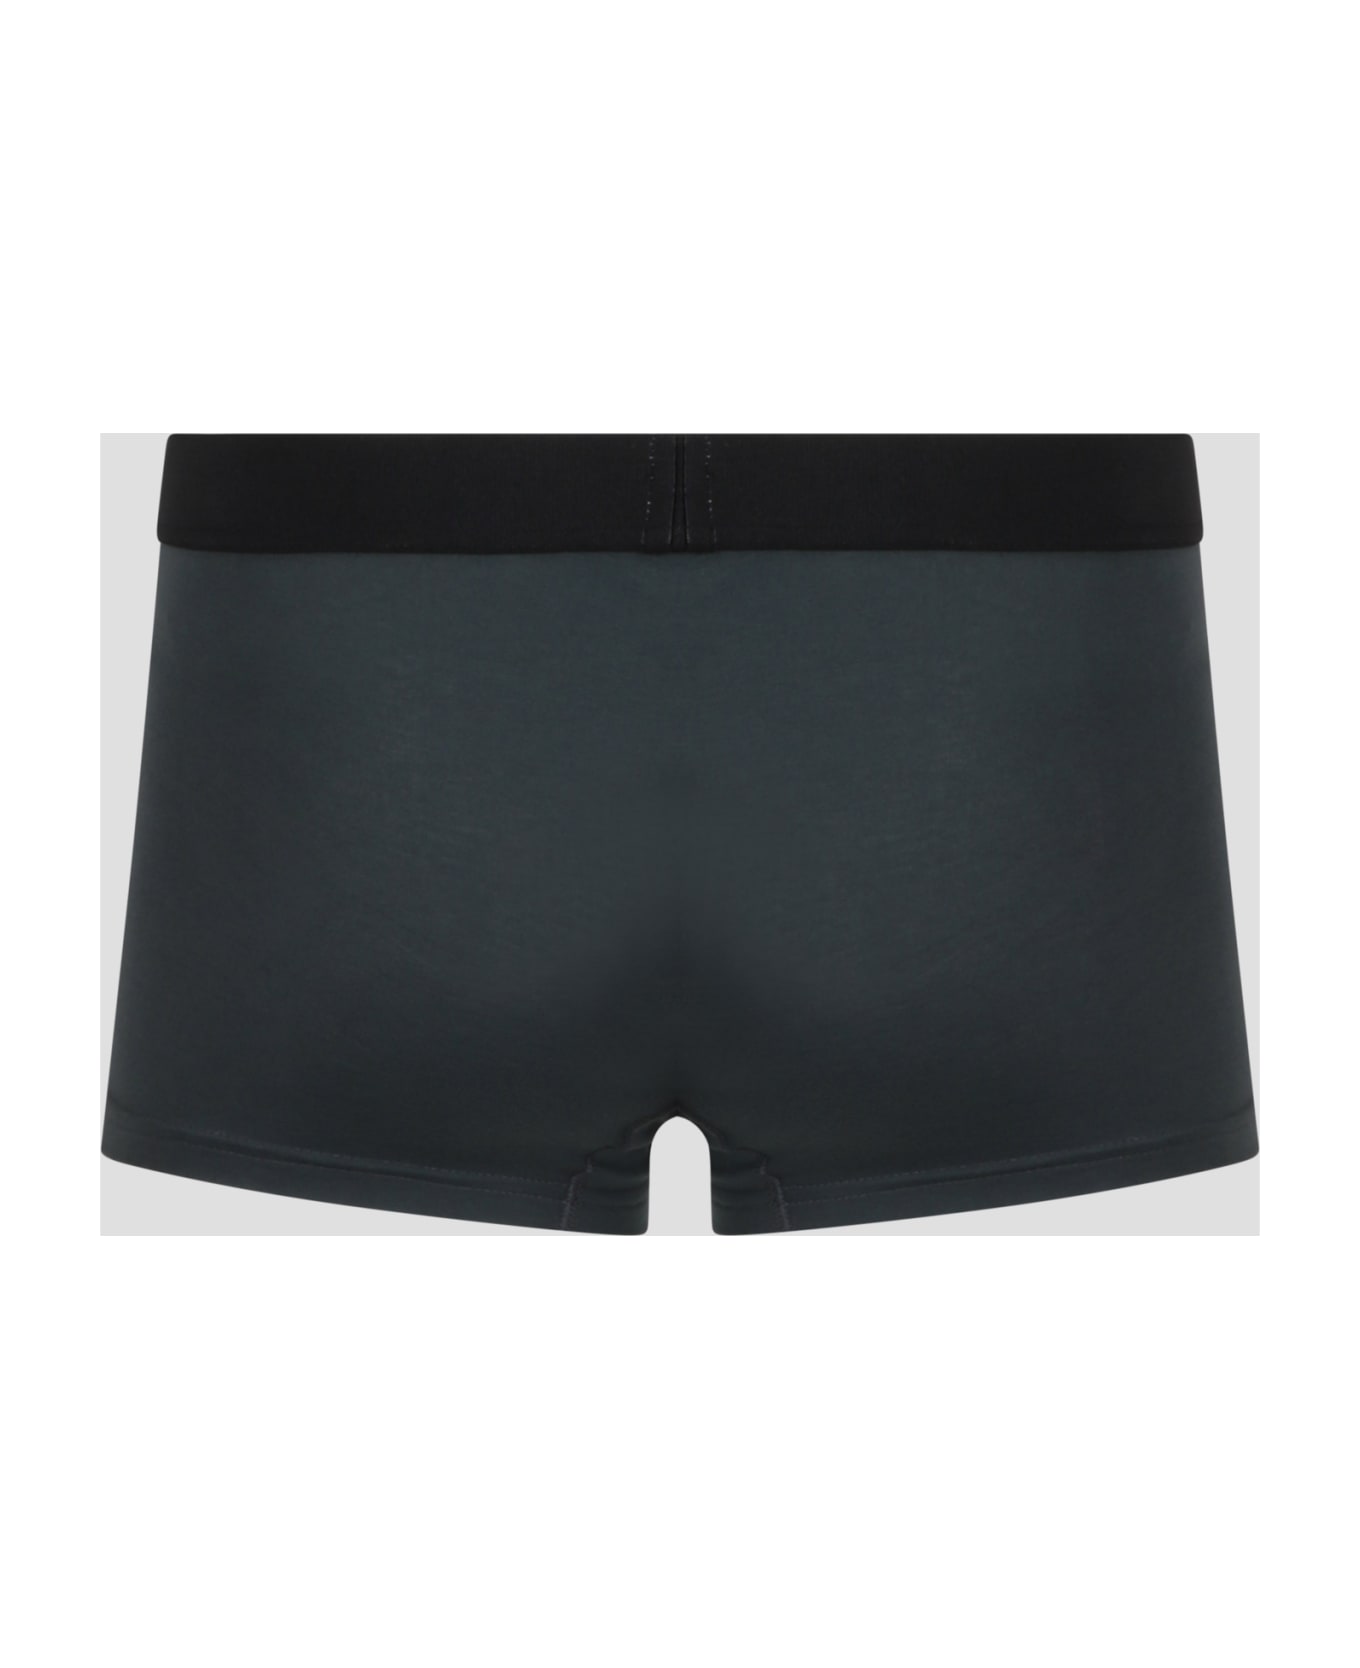 Dsquared2 Ceresio 9 Trunks - Green